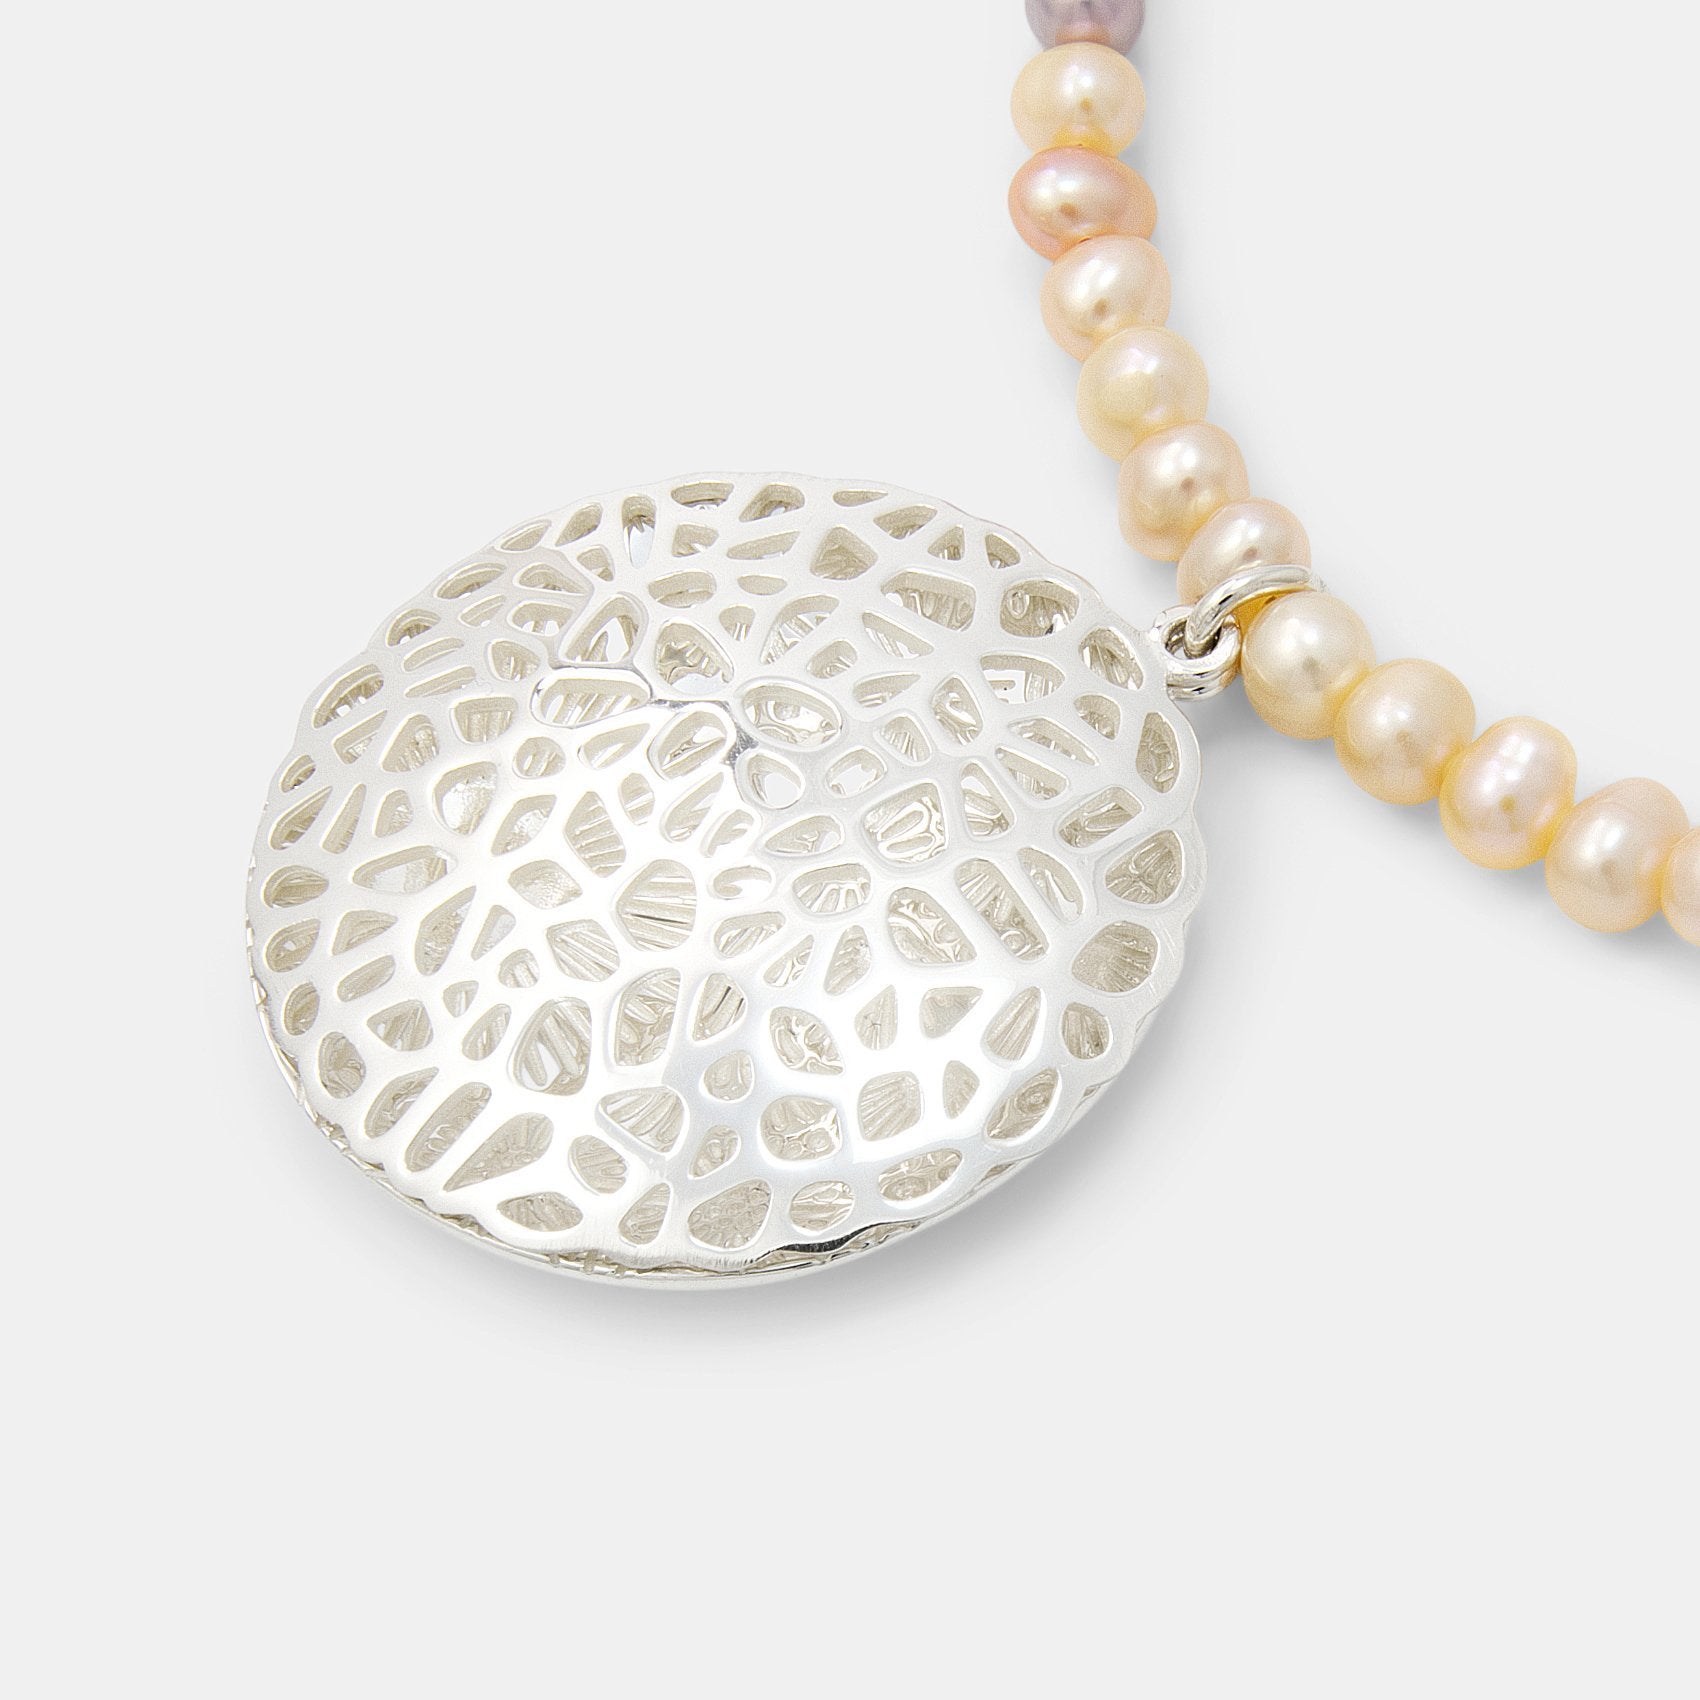 Coral reef open locket on peach pearl necklace - Simone Walsh Jewellery Australia